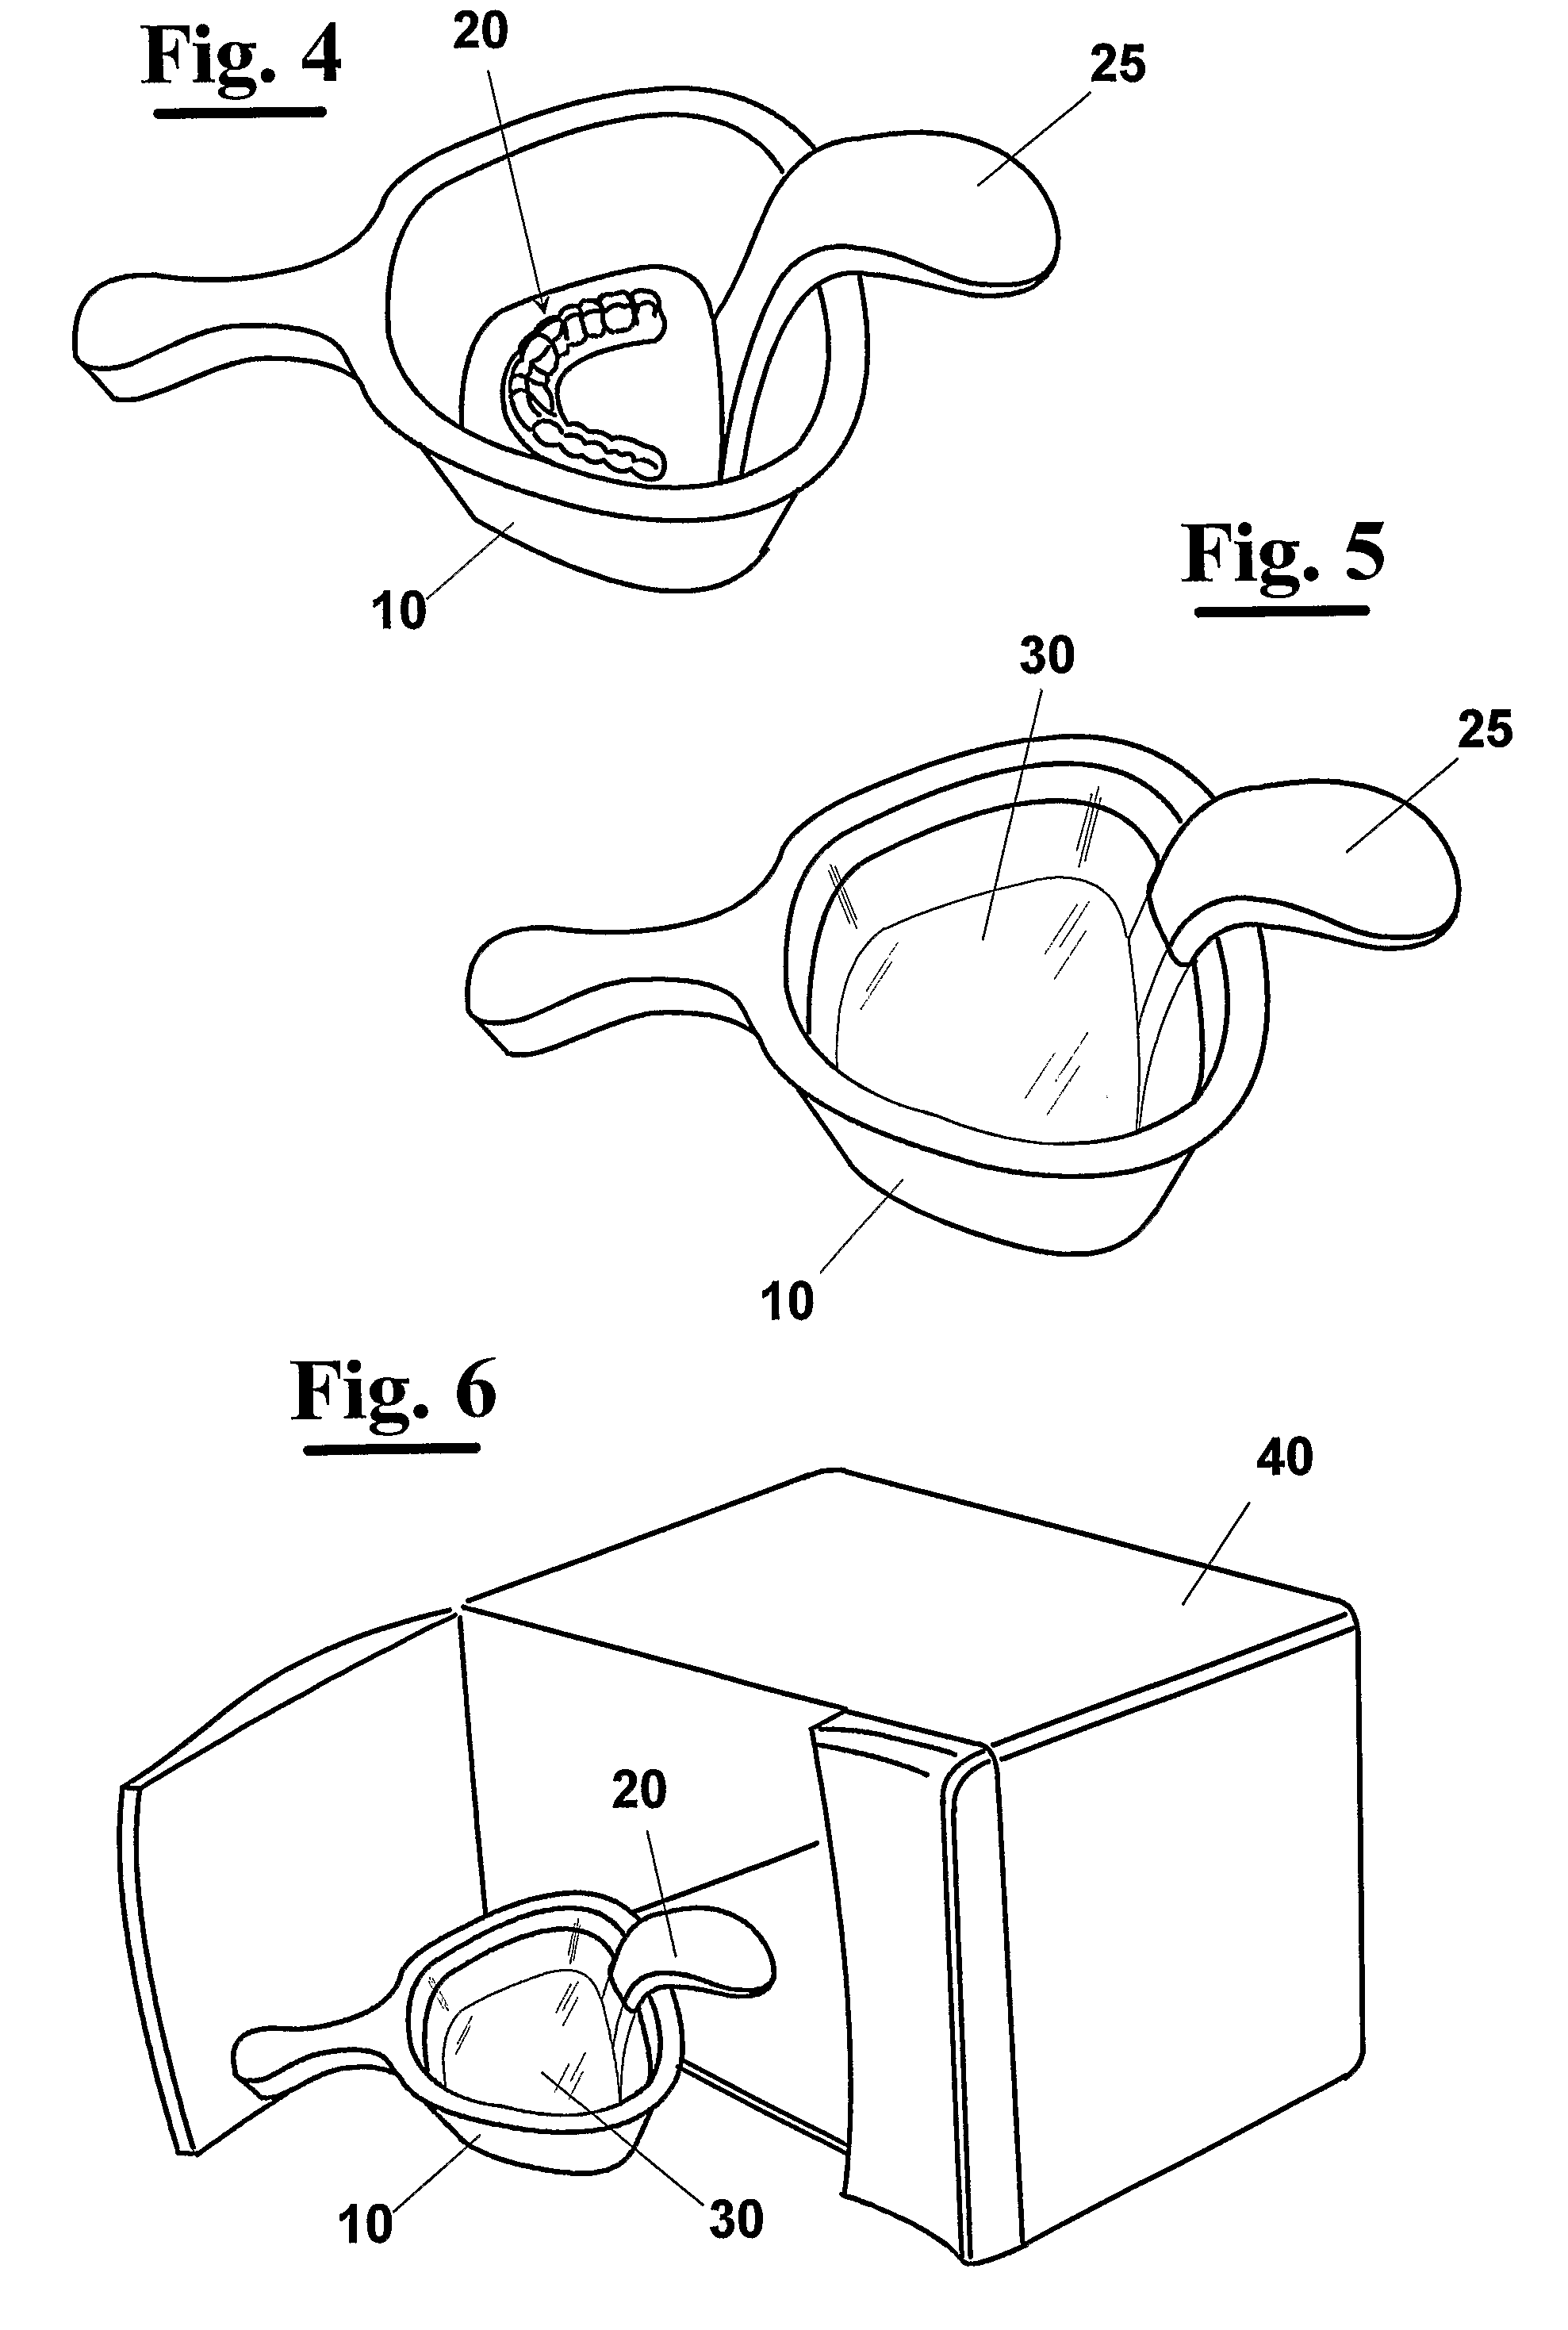 Method for producing a dental impression tray